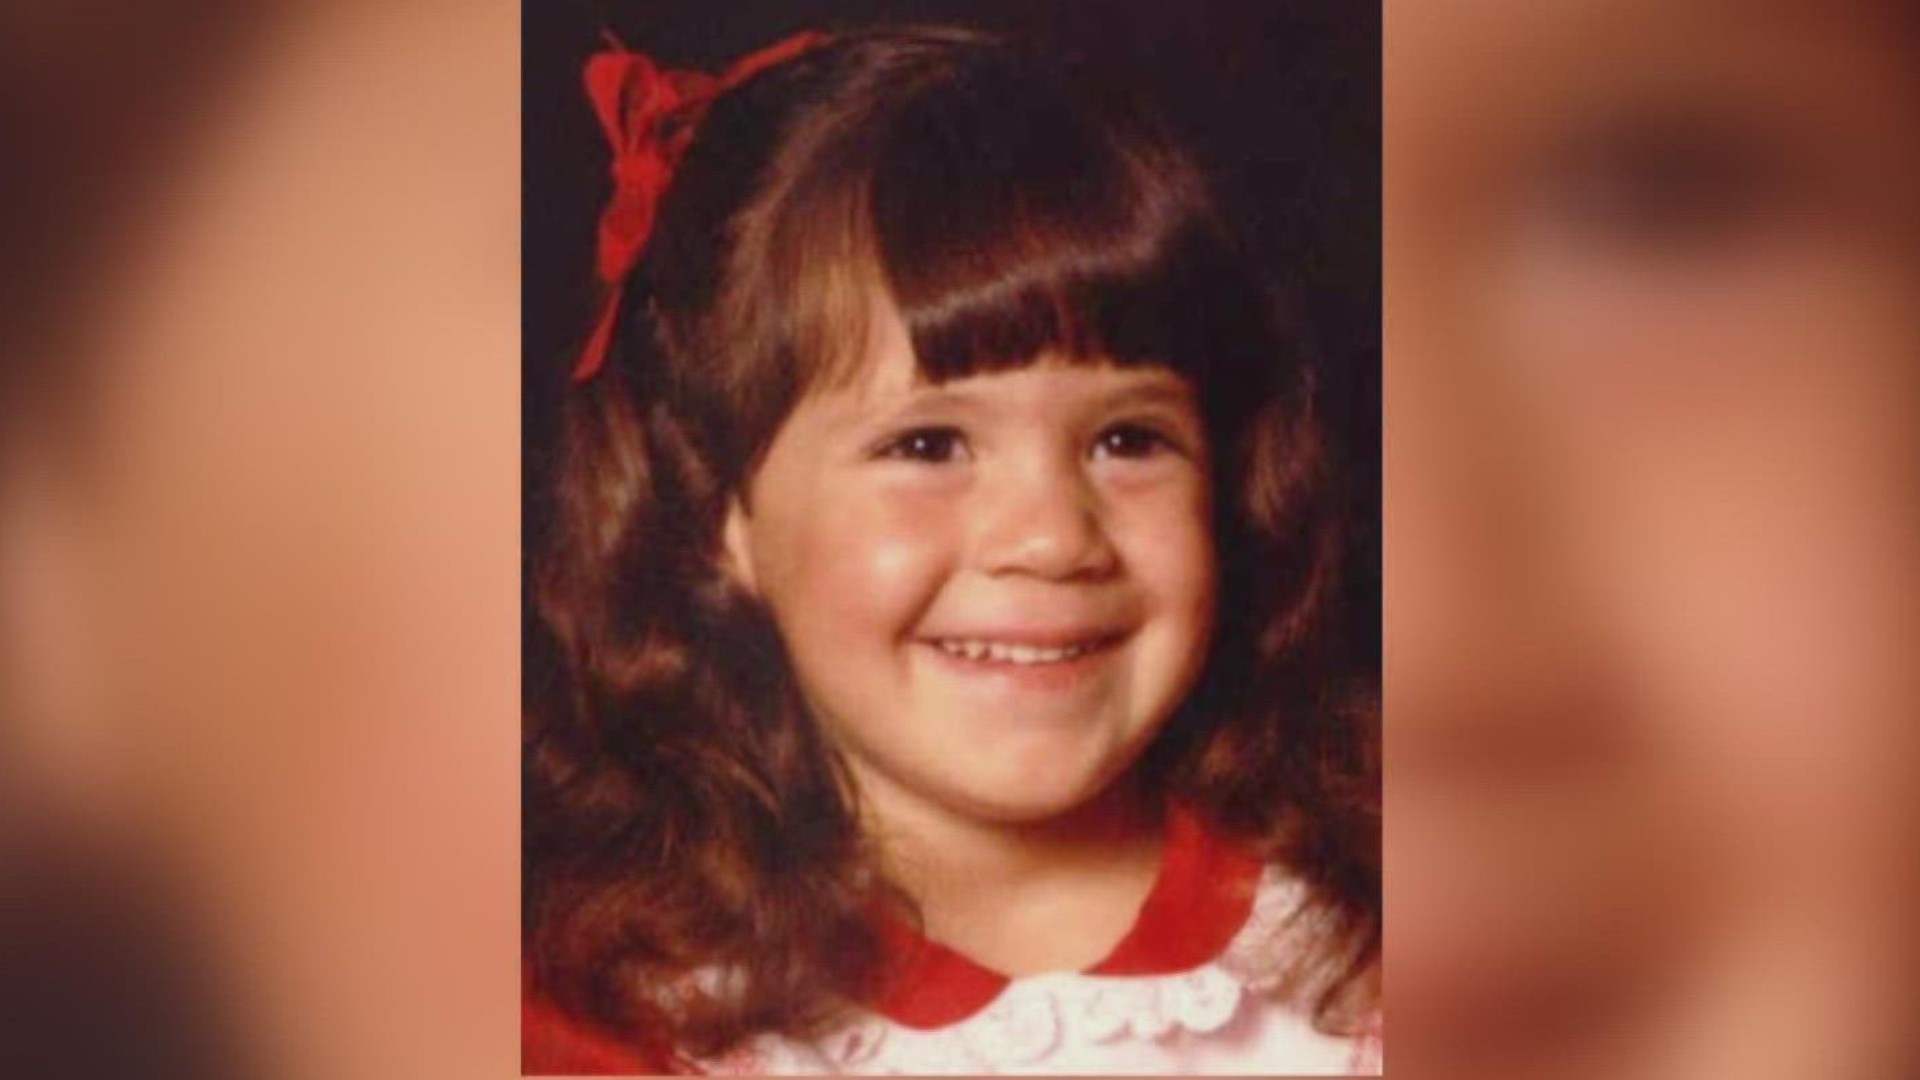 Deputies say they've arrested the man who they believe kidnapped and killed four-year-old Jessica Gutierrez in South Carolina in June of 1986.